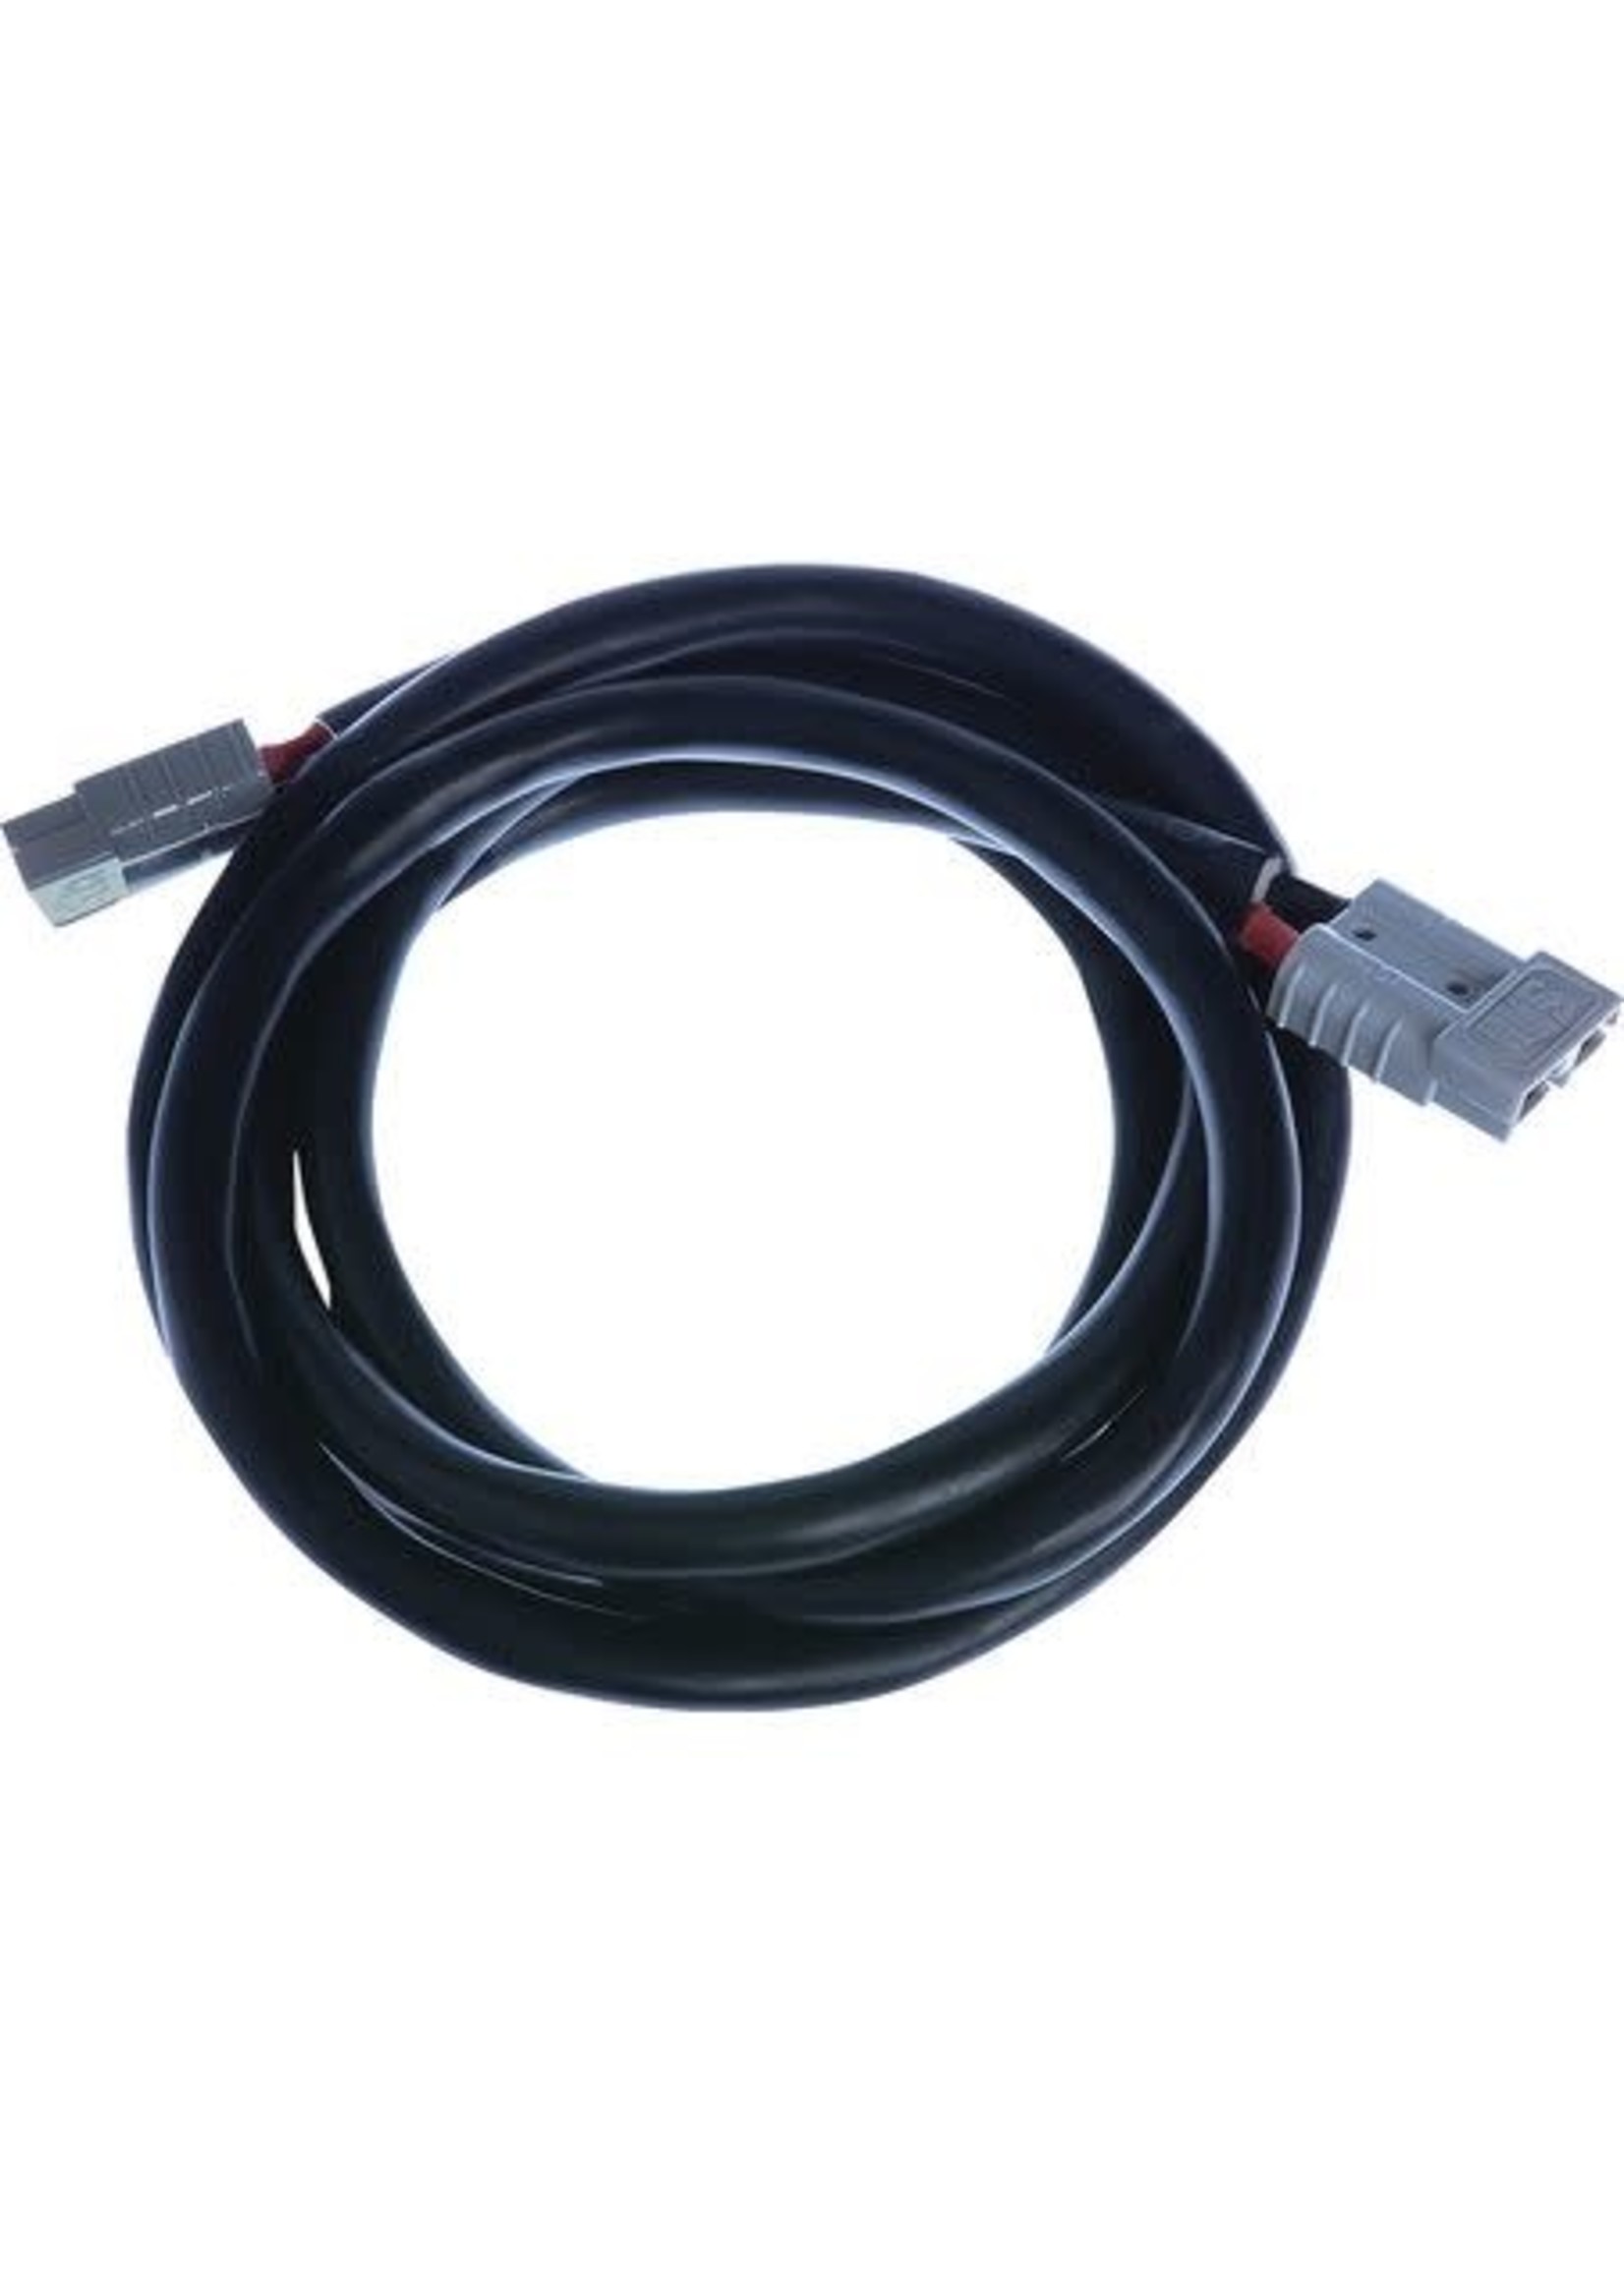 THUNDER 50A 3M Extension Lead With Anderson Style Connectors